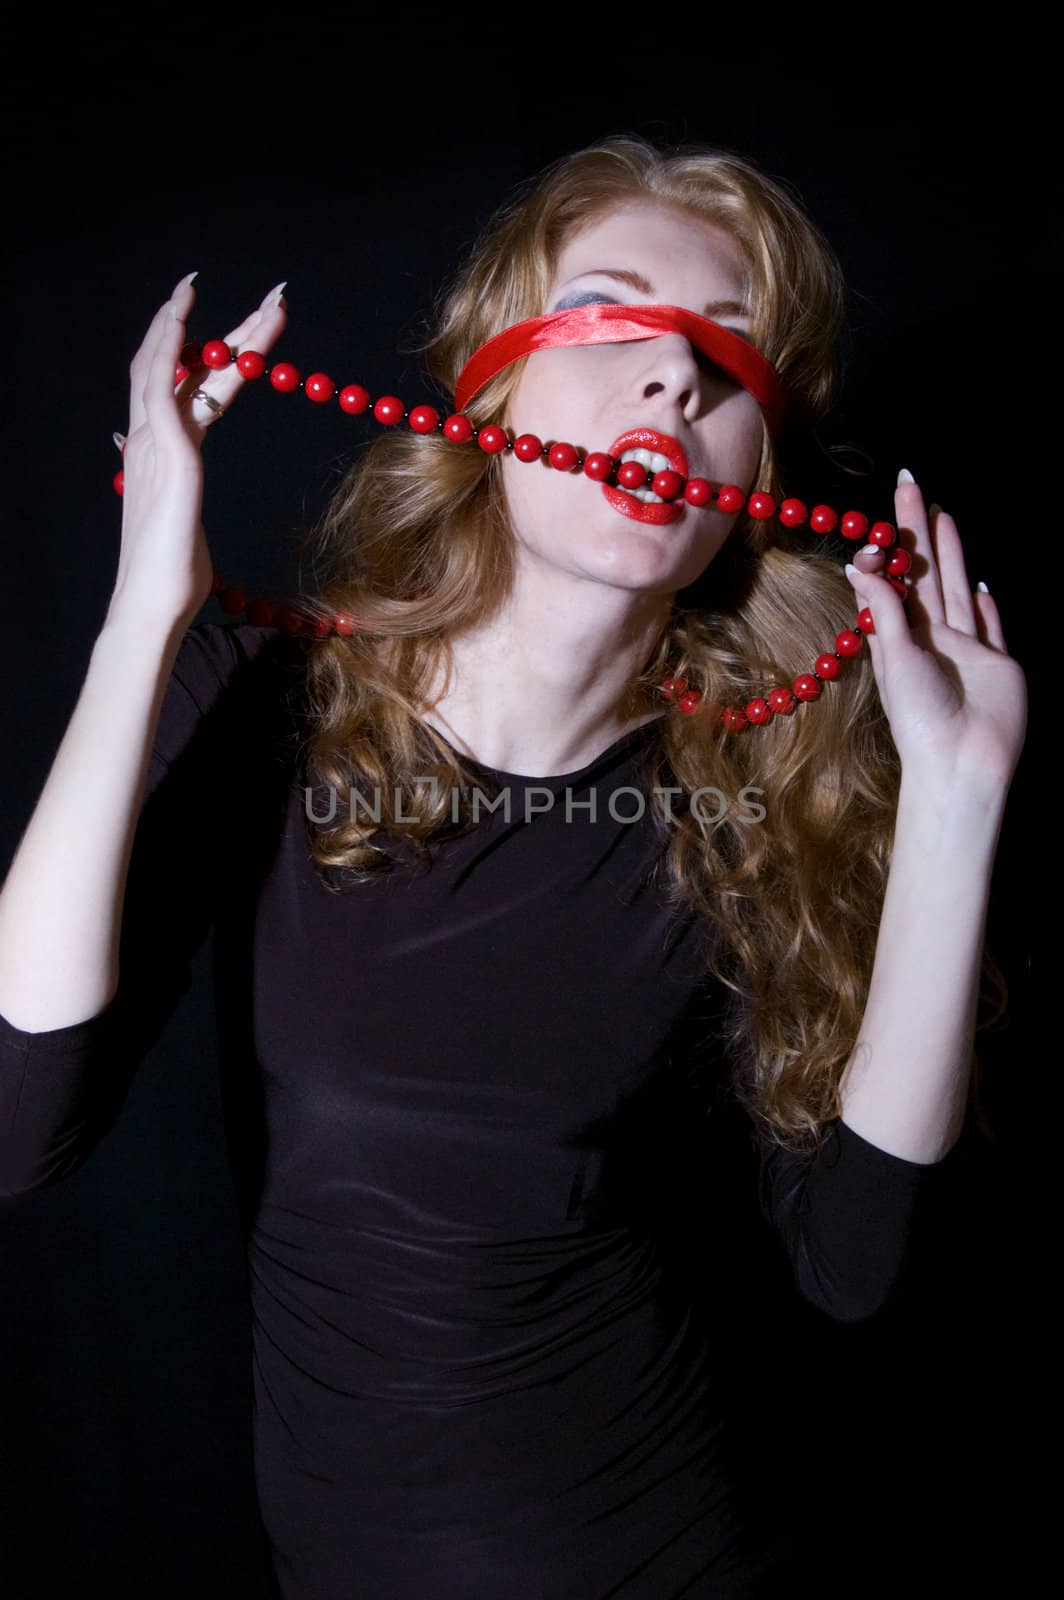 Woman with bandage on her eyes bites red necklace